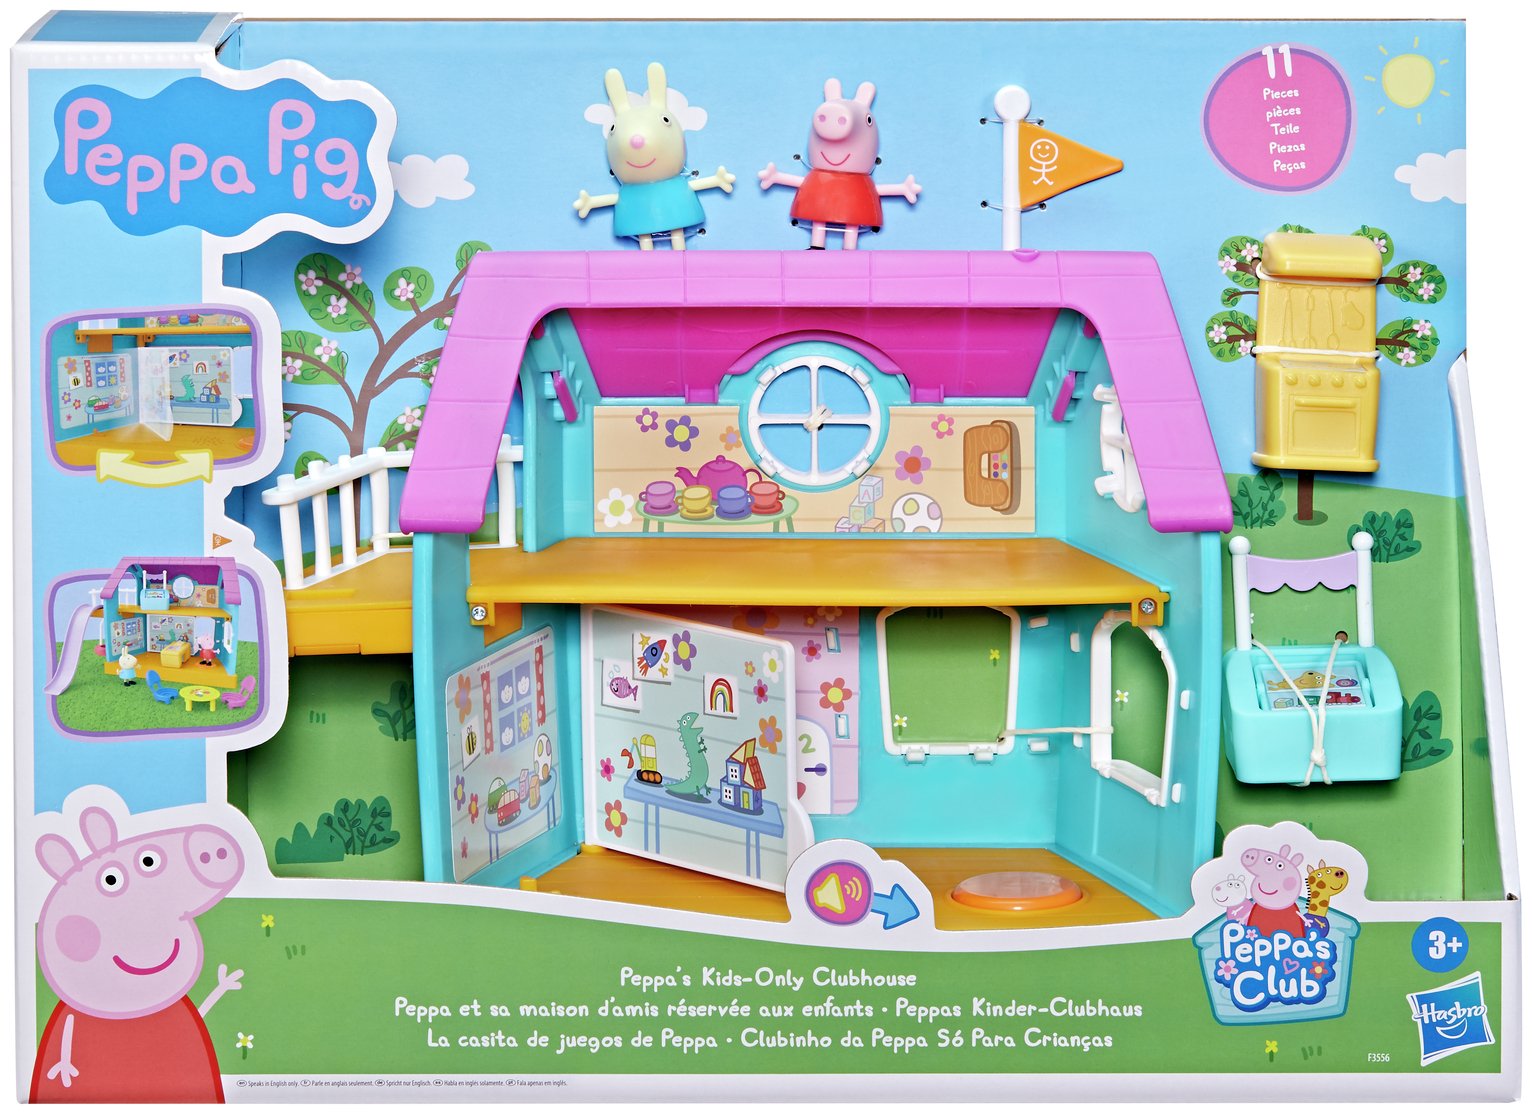 Peppa Pig Peppa's Kids-Only Clubhouse review